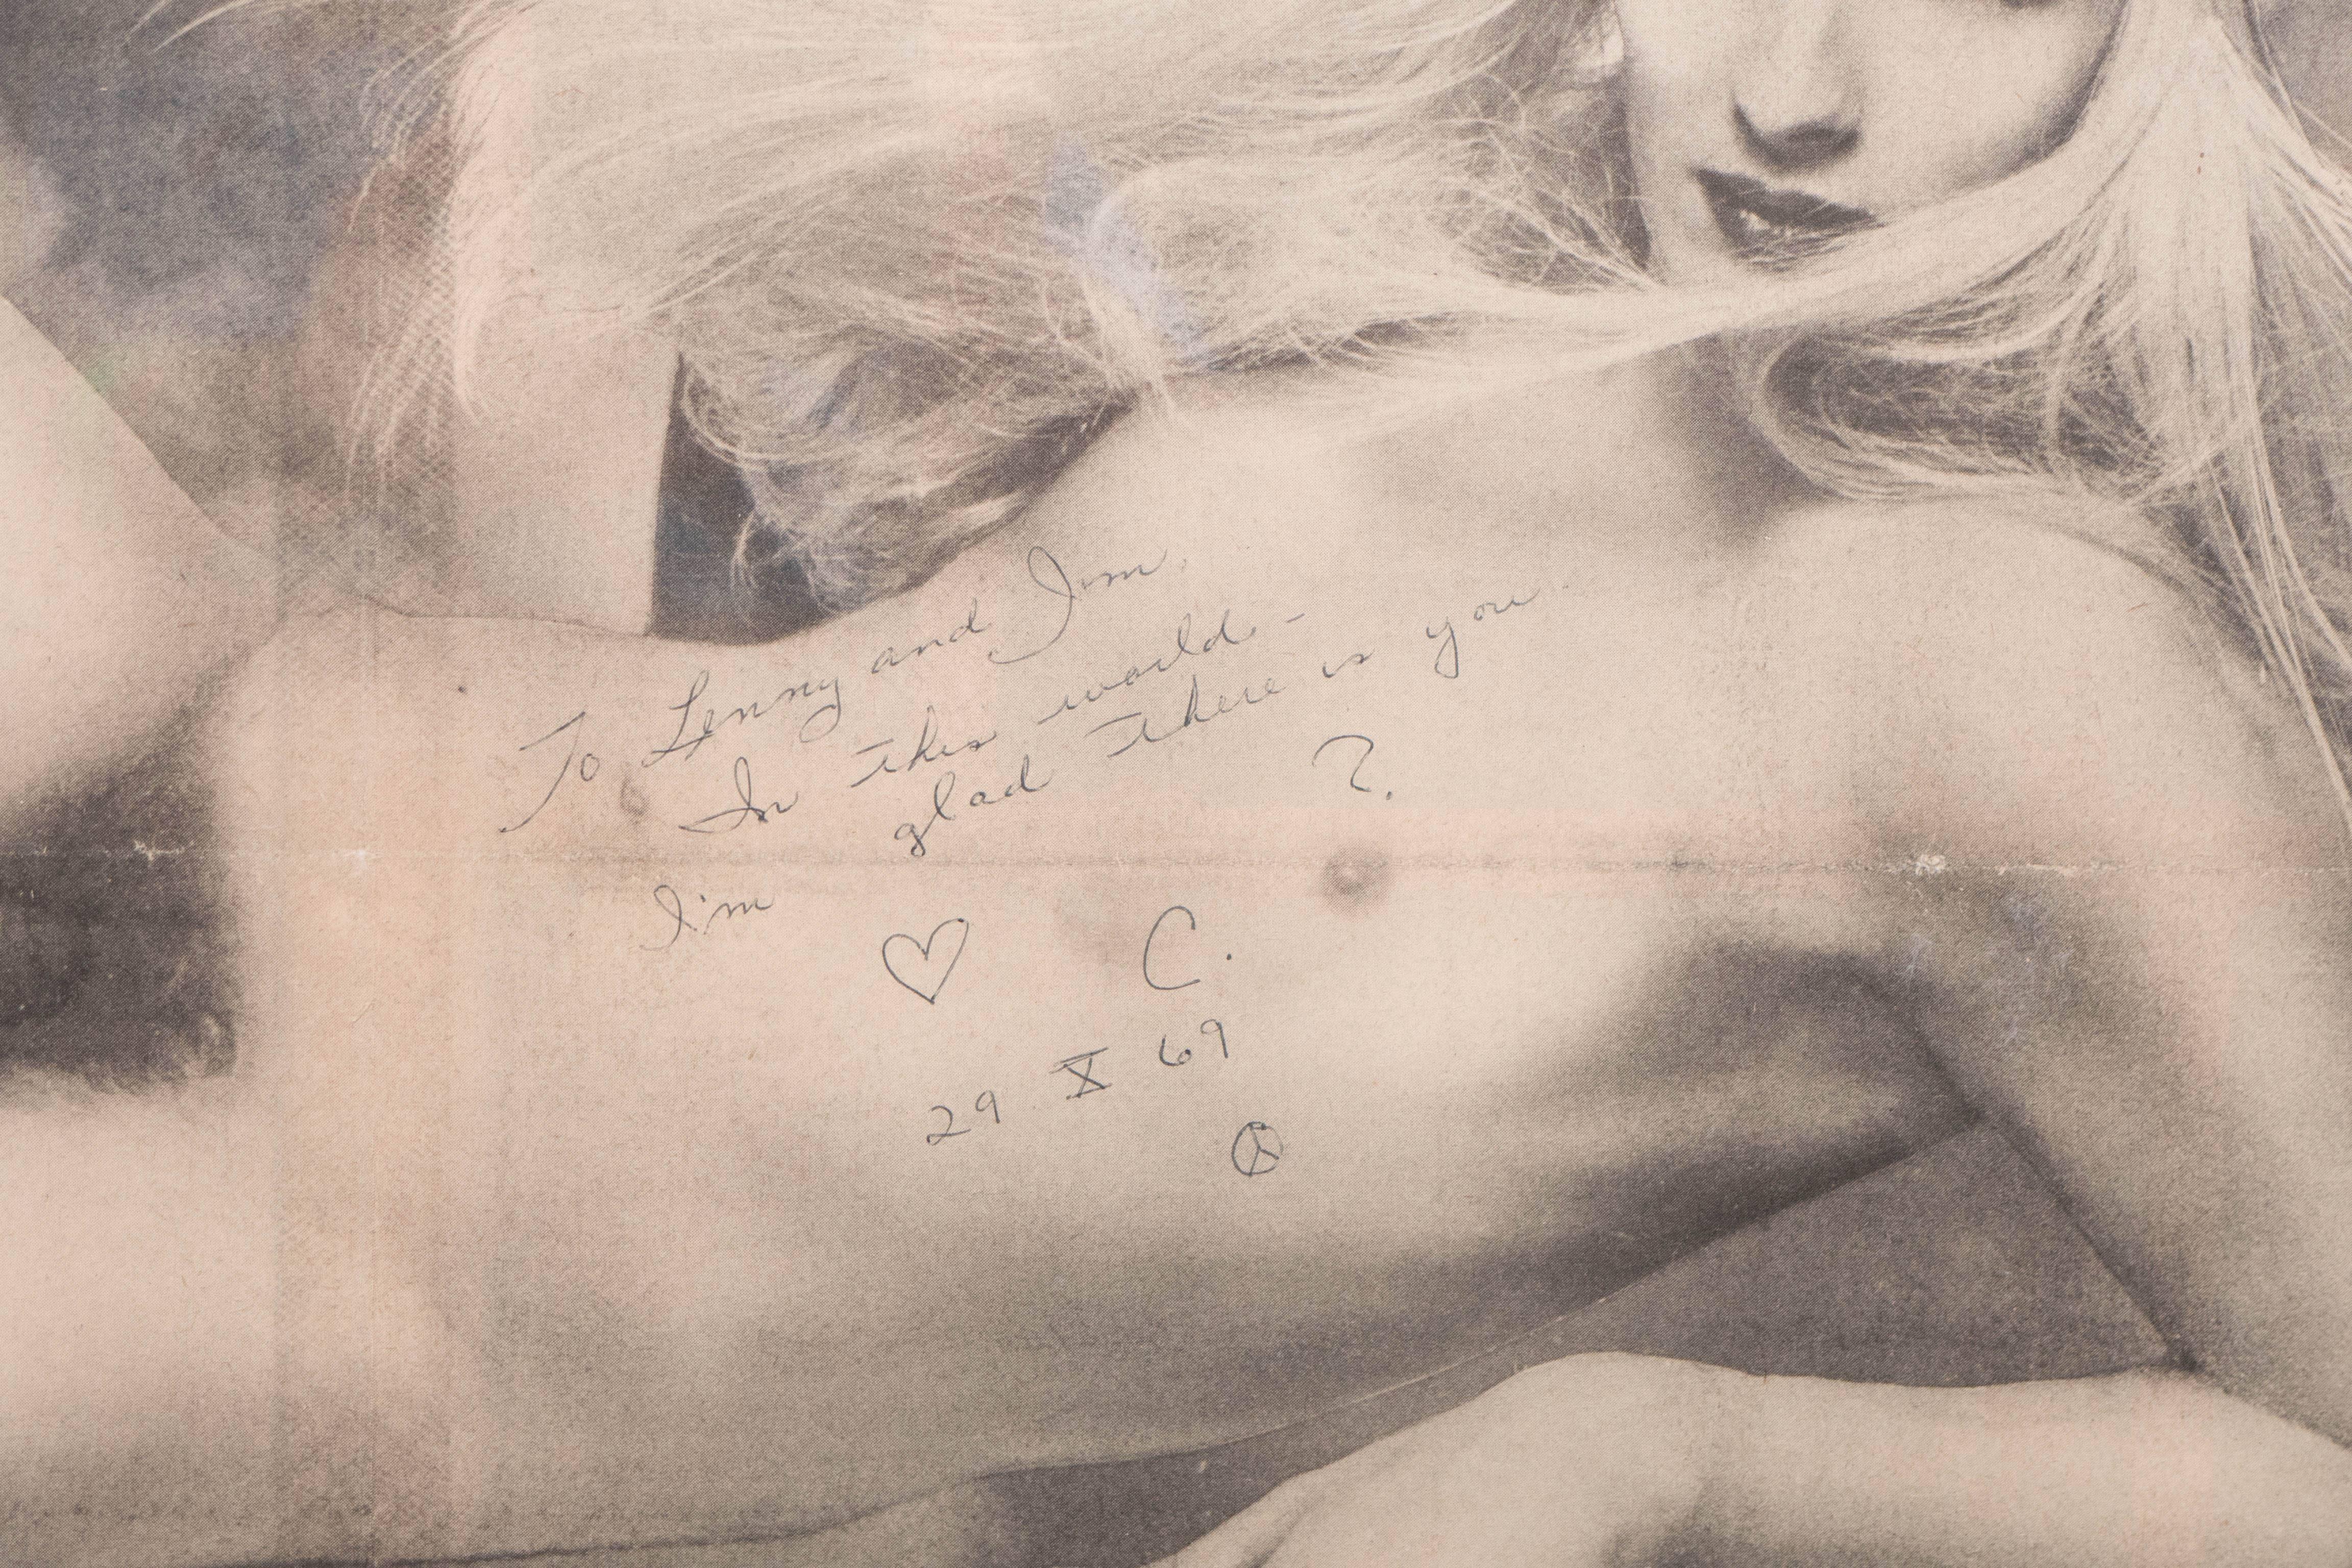 A vintage, autographed poster of superstar Candy Darling, centerfold of Andy Warhol, from 'Newspaper', an early precursor of ‘Interview Magazine’; Signed to Lenny and Jim (Leonard Barton and Jim Hanify), fellow residents of the Chelsea Hotel. The